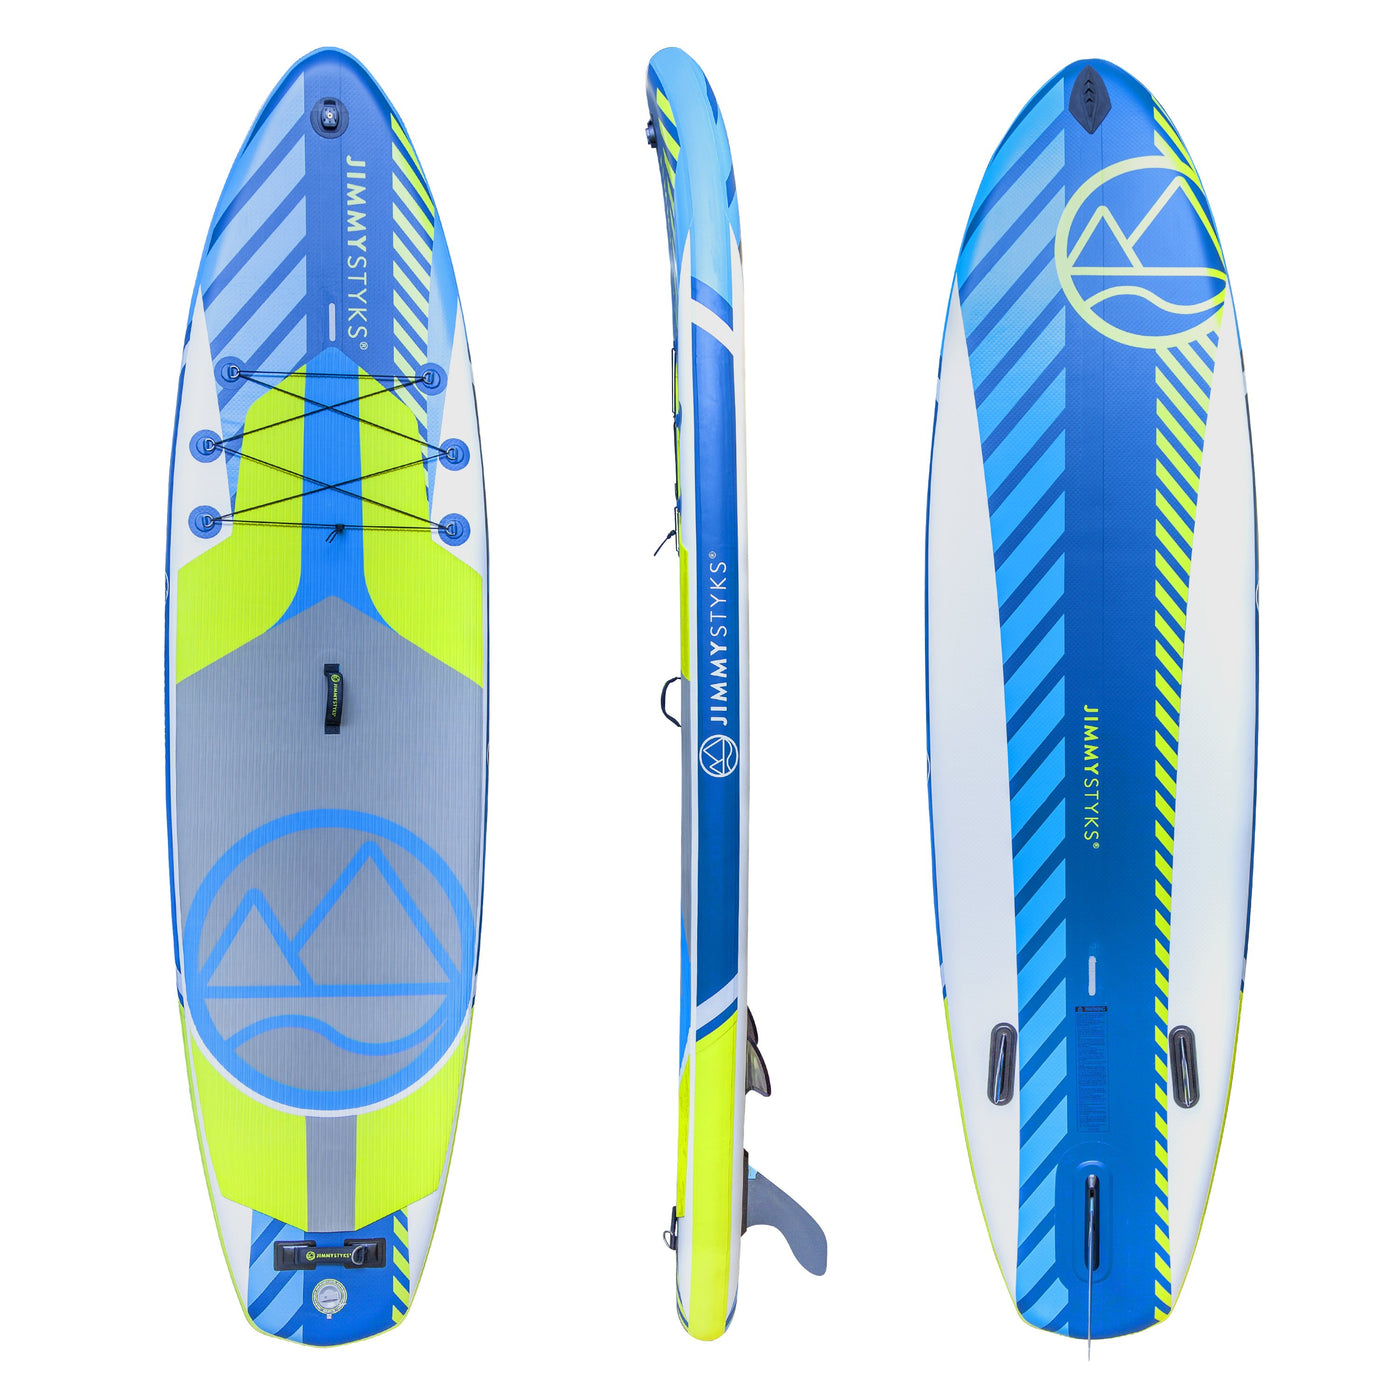 Image of all the views of the Jimmy Styks 11' Puffer Inflatable SUP board. Front, side and rear.